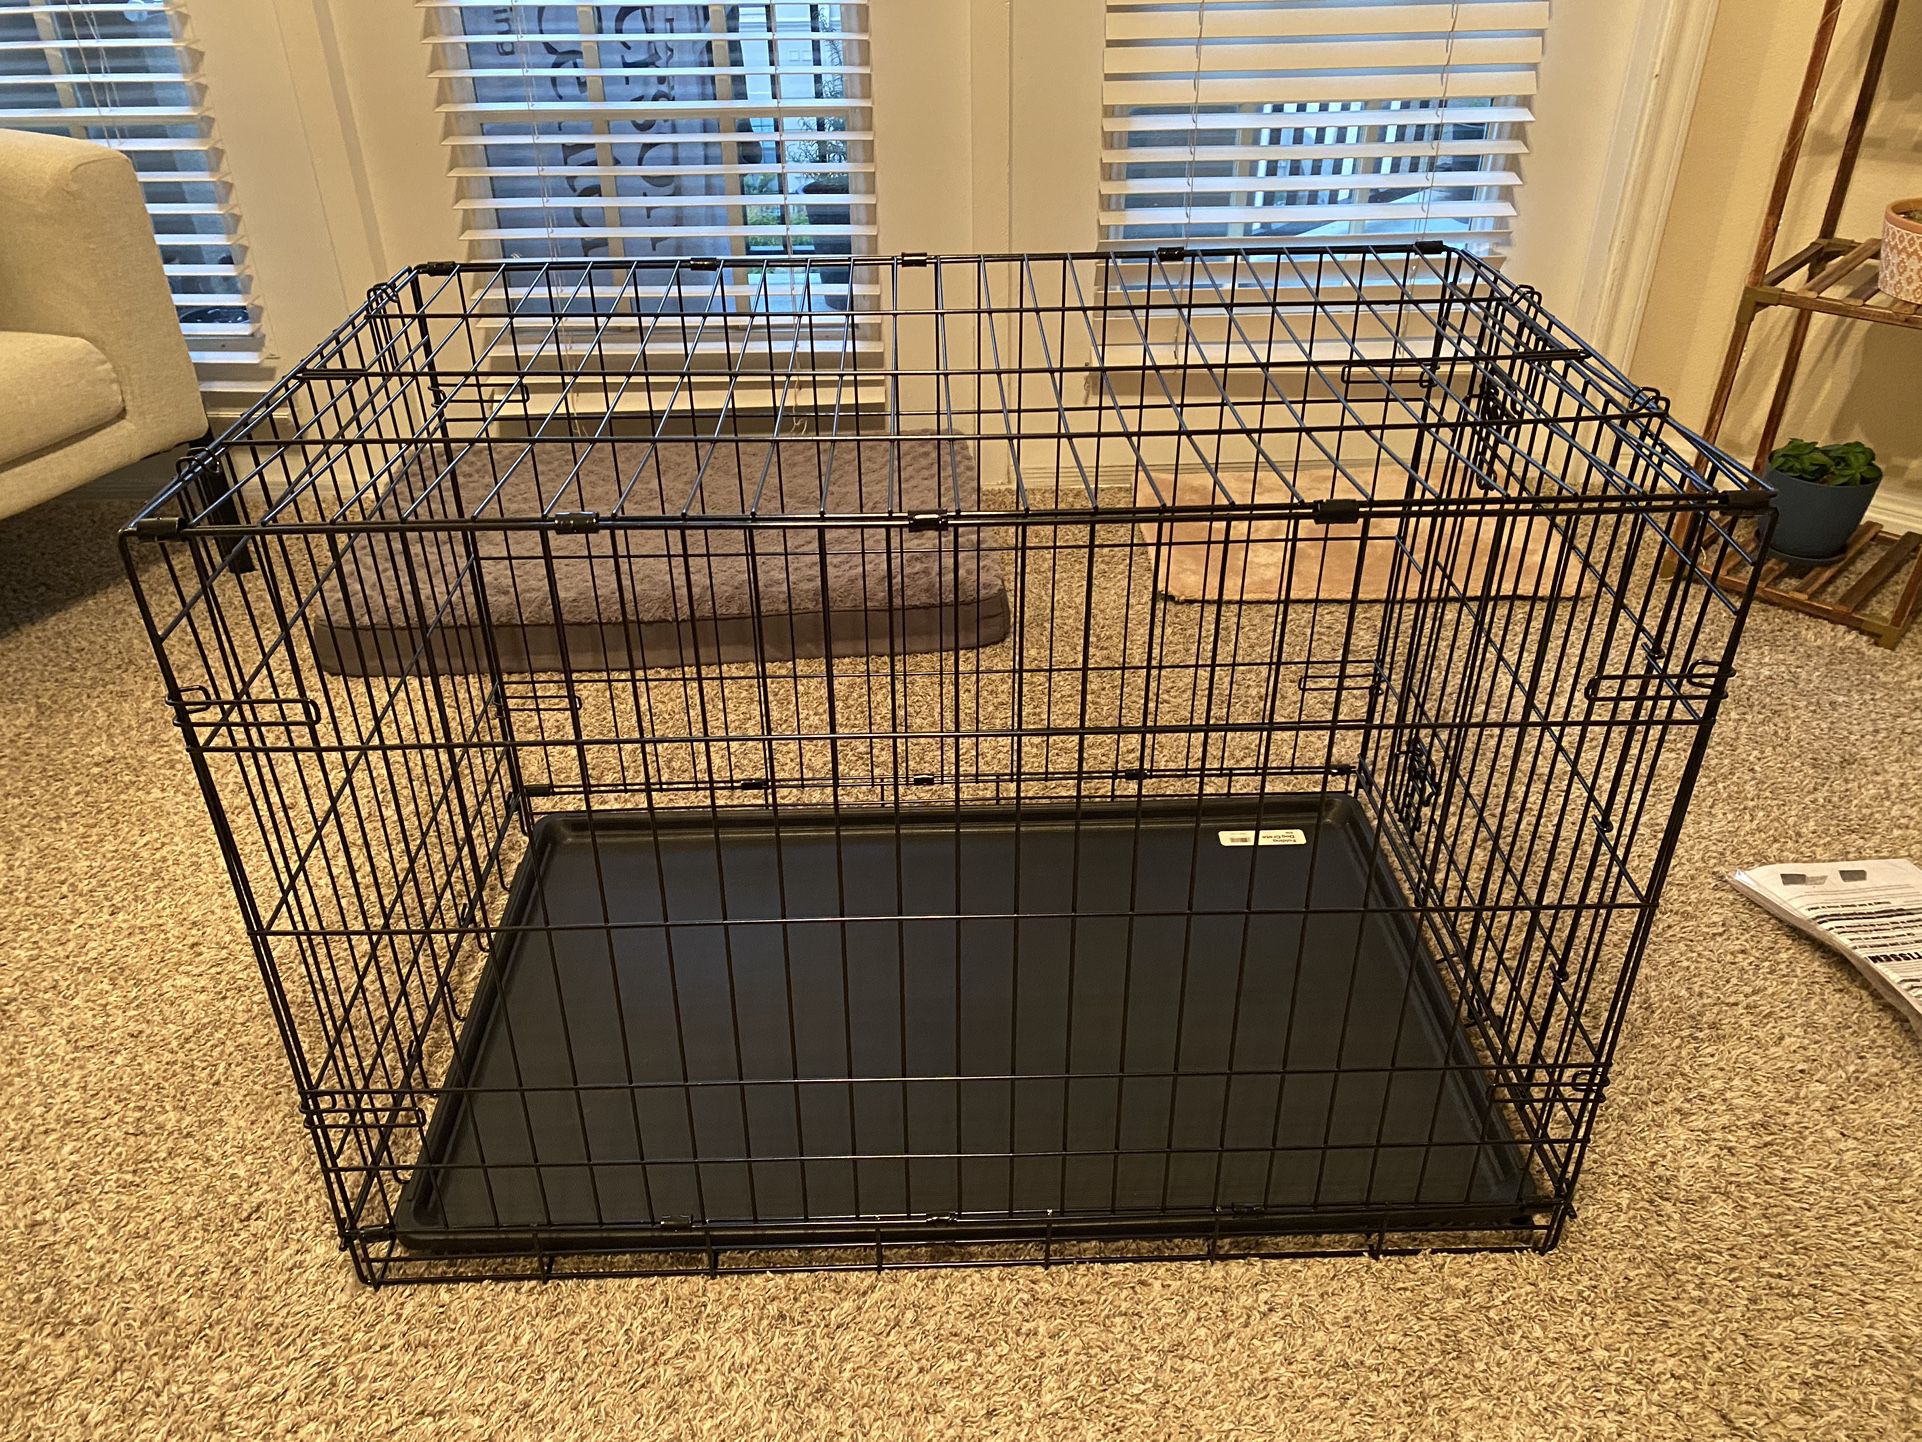 New Dog Crate  36"L x 23"W x 25"H — Only Pick Up 